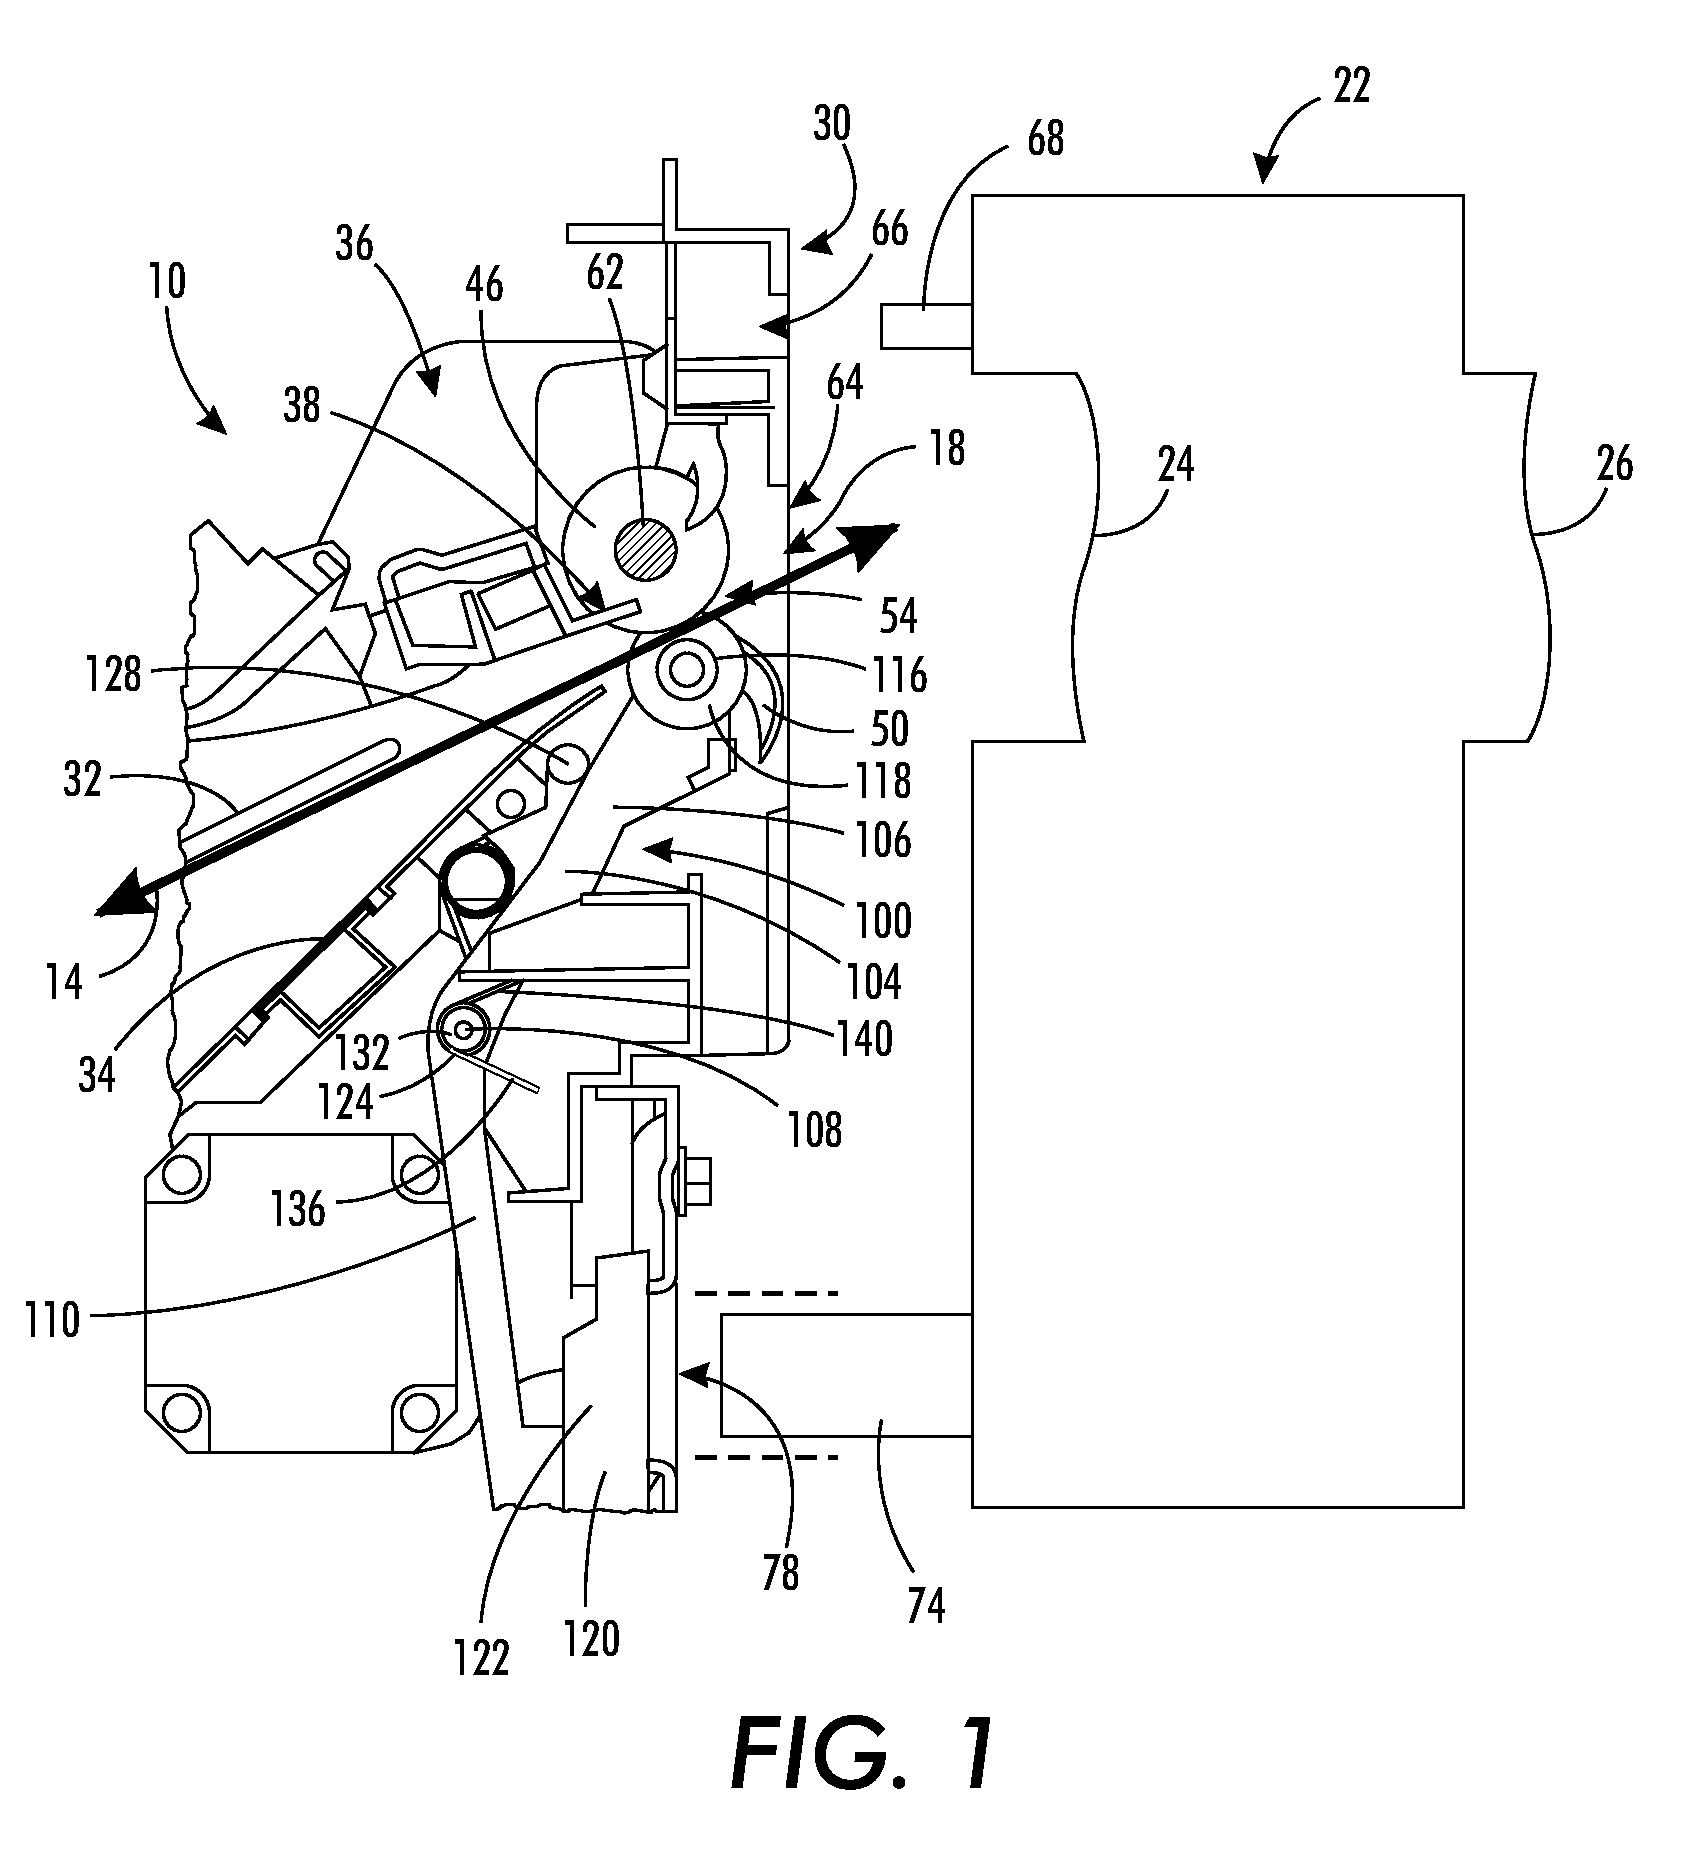 Apparatus and method for temporarily increasing the beam strength of a media sheet in a printer